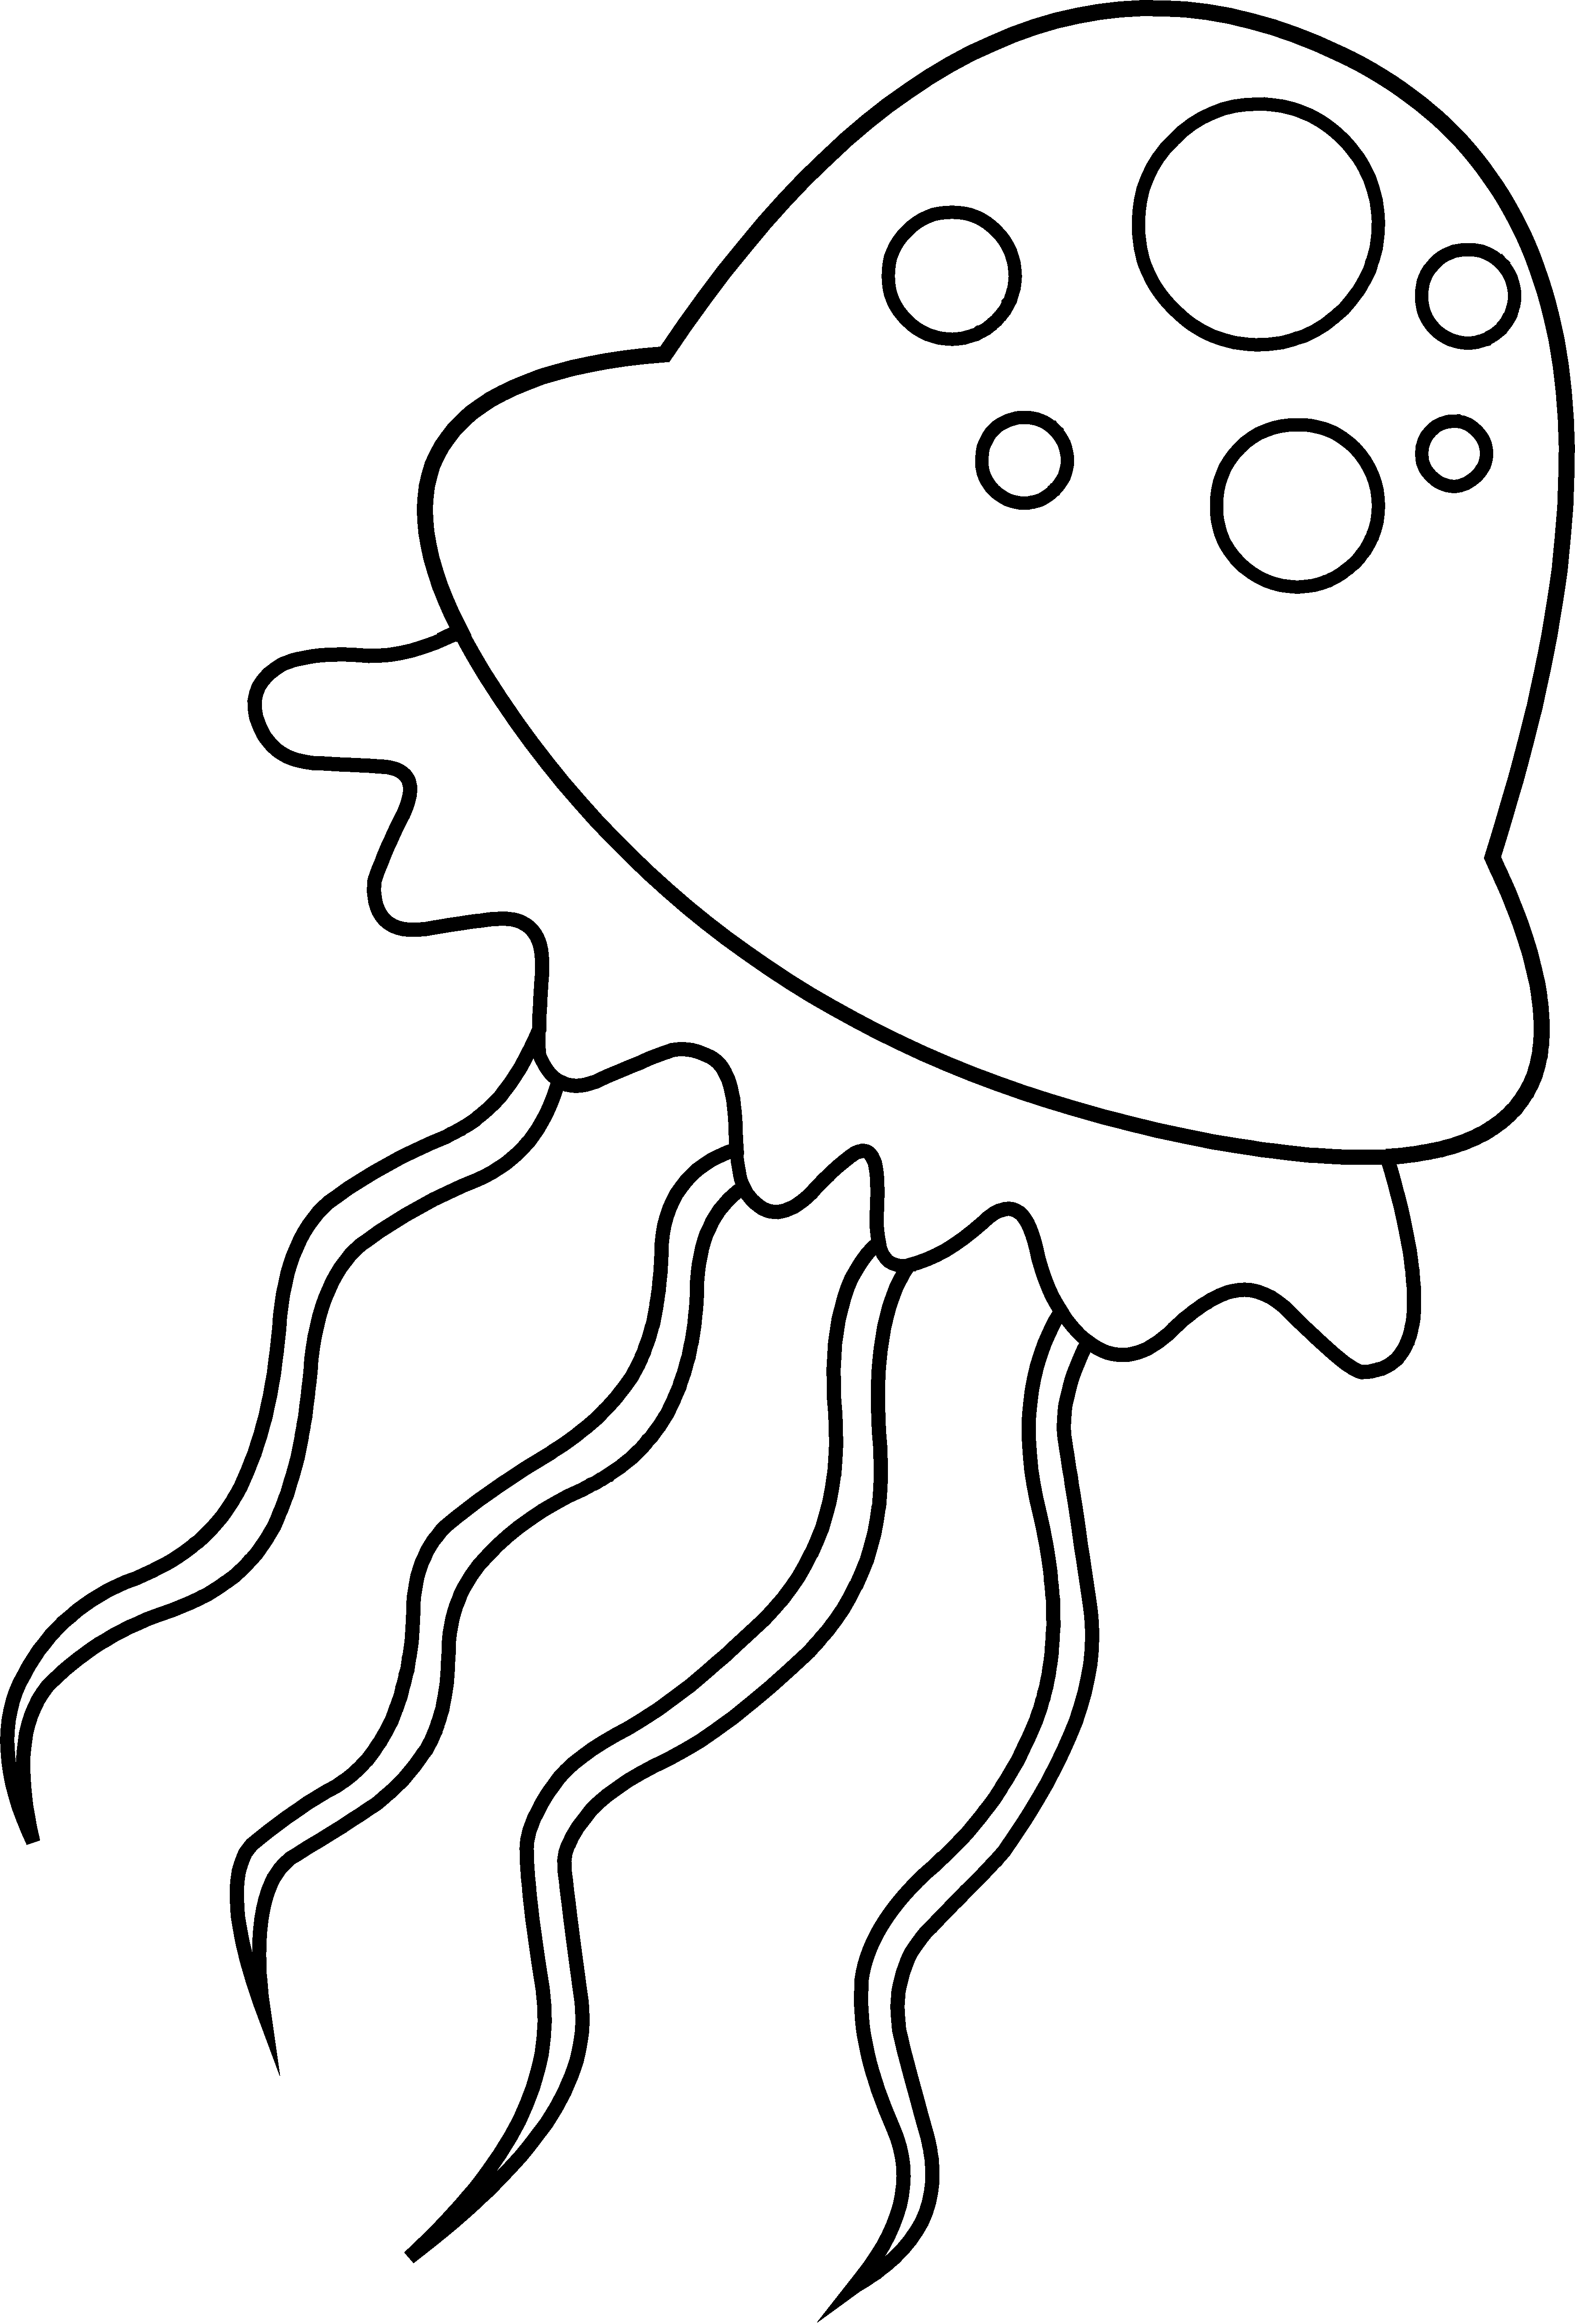 Cartoon Jellyfish Clip Art Coloring Page